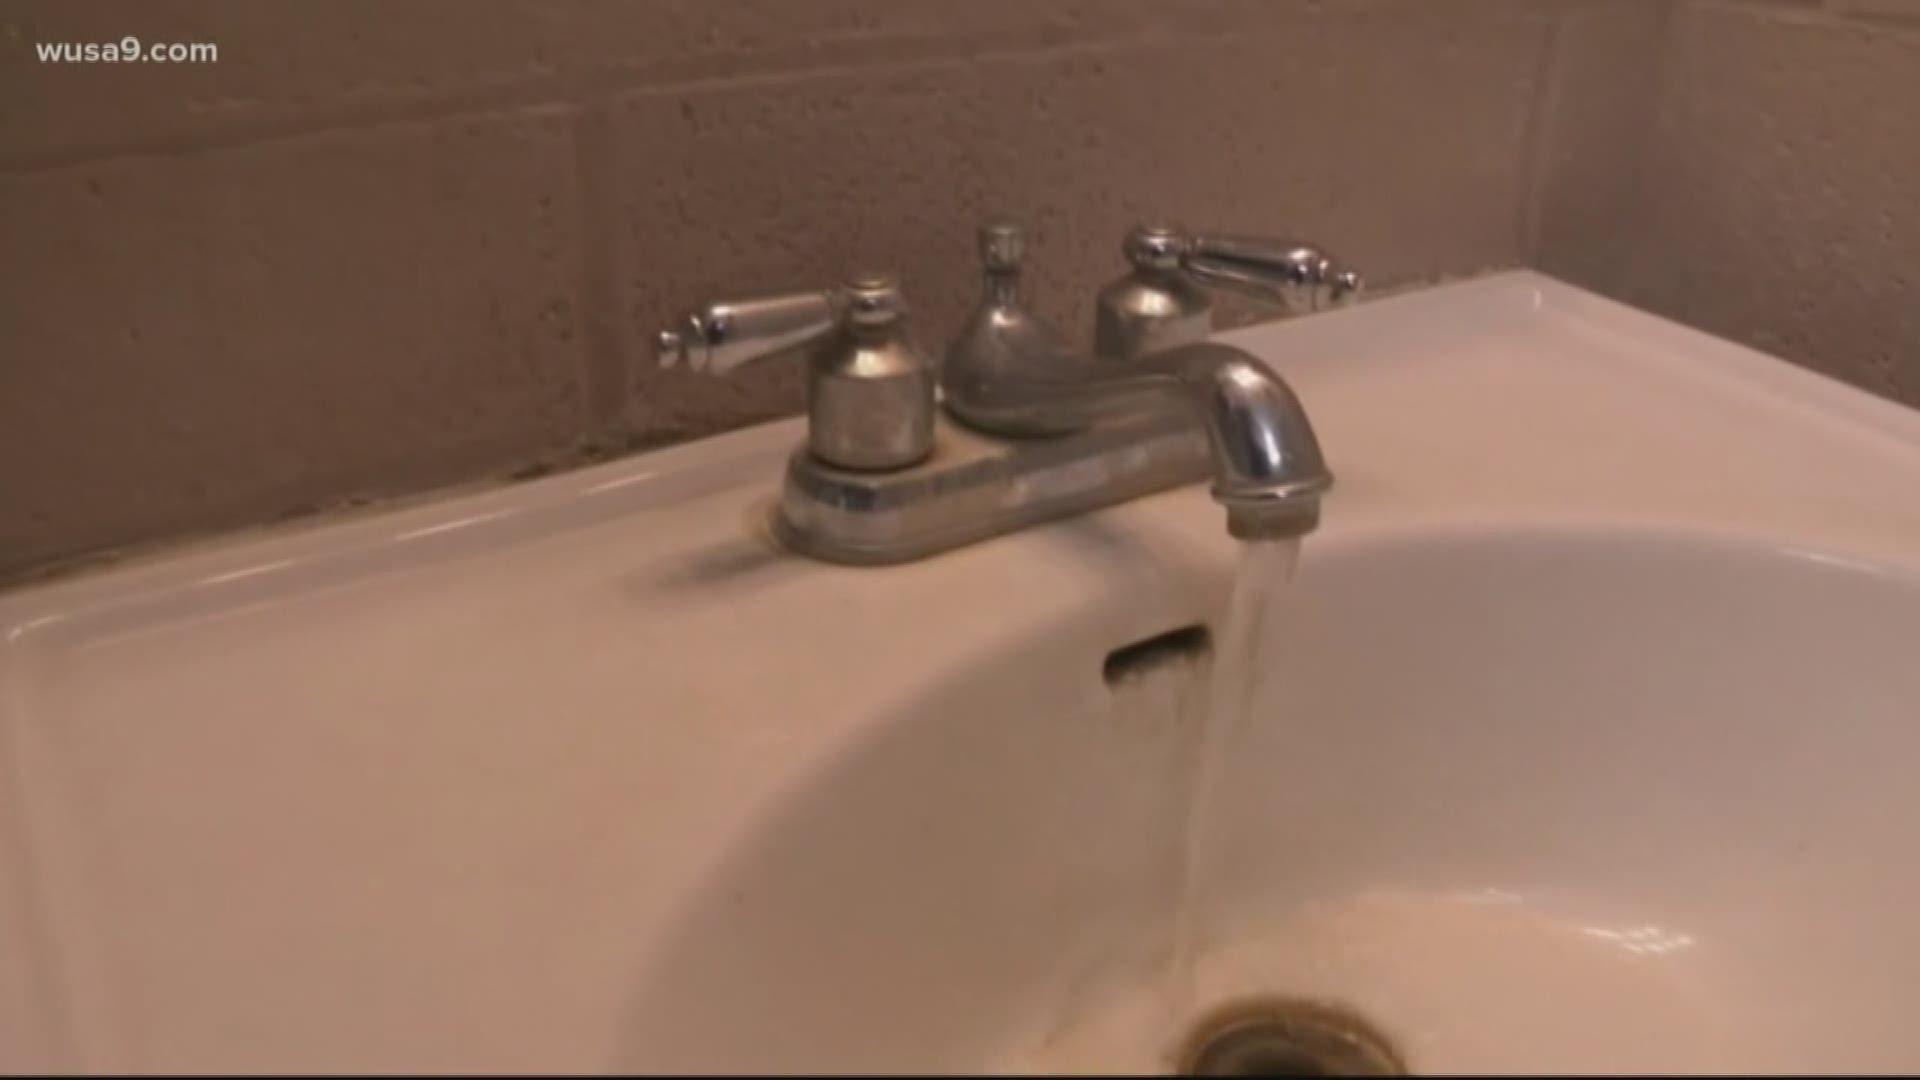 High levels of PFAS, known as "forever chemicals," found in tap water in D.C. and Maryland, a report by the Environmental Working Group finds.